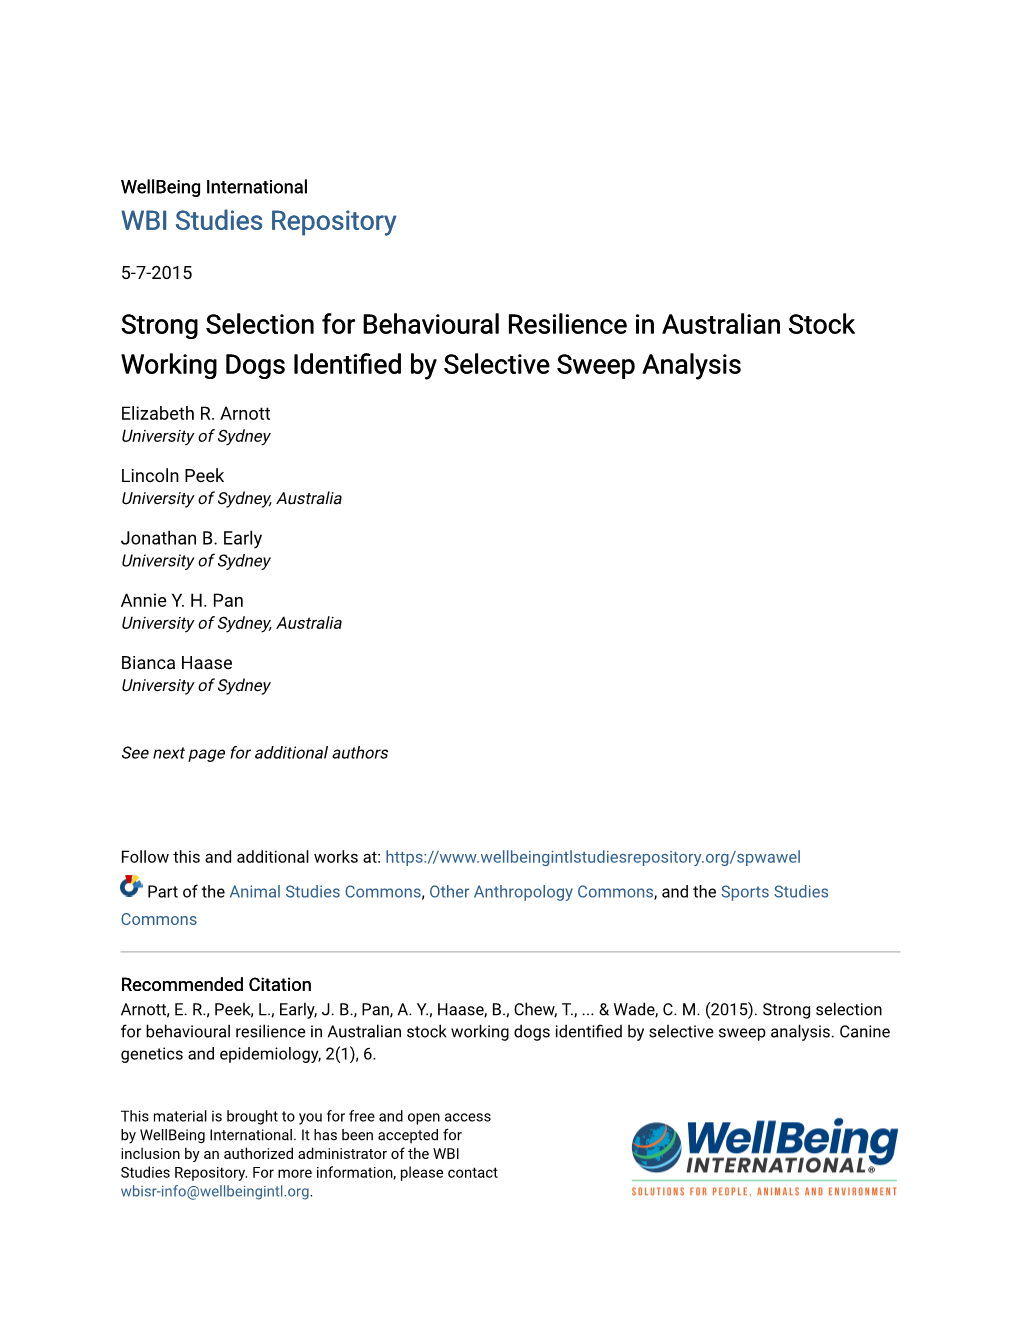 Strong Selection for Behavioural Resilience in Australian Stock Working Dogs Identified Yb Selective Sweep Analysis